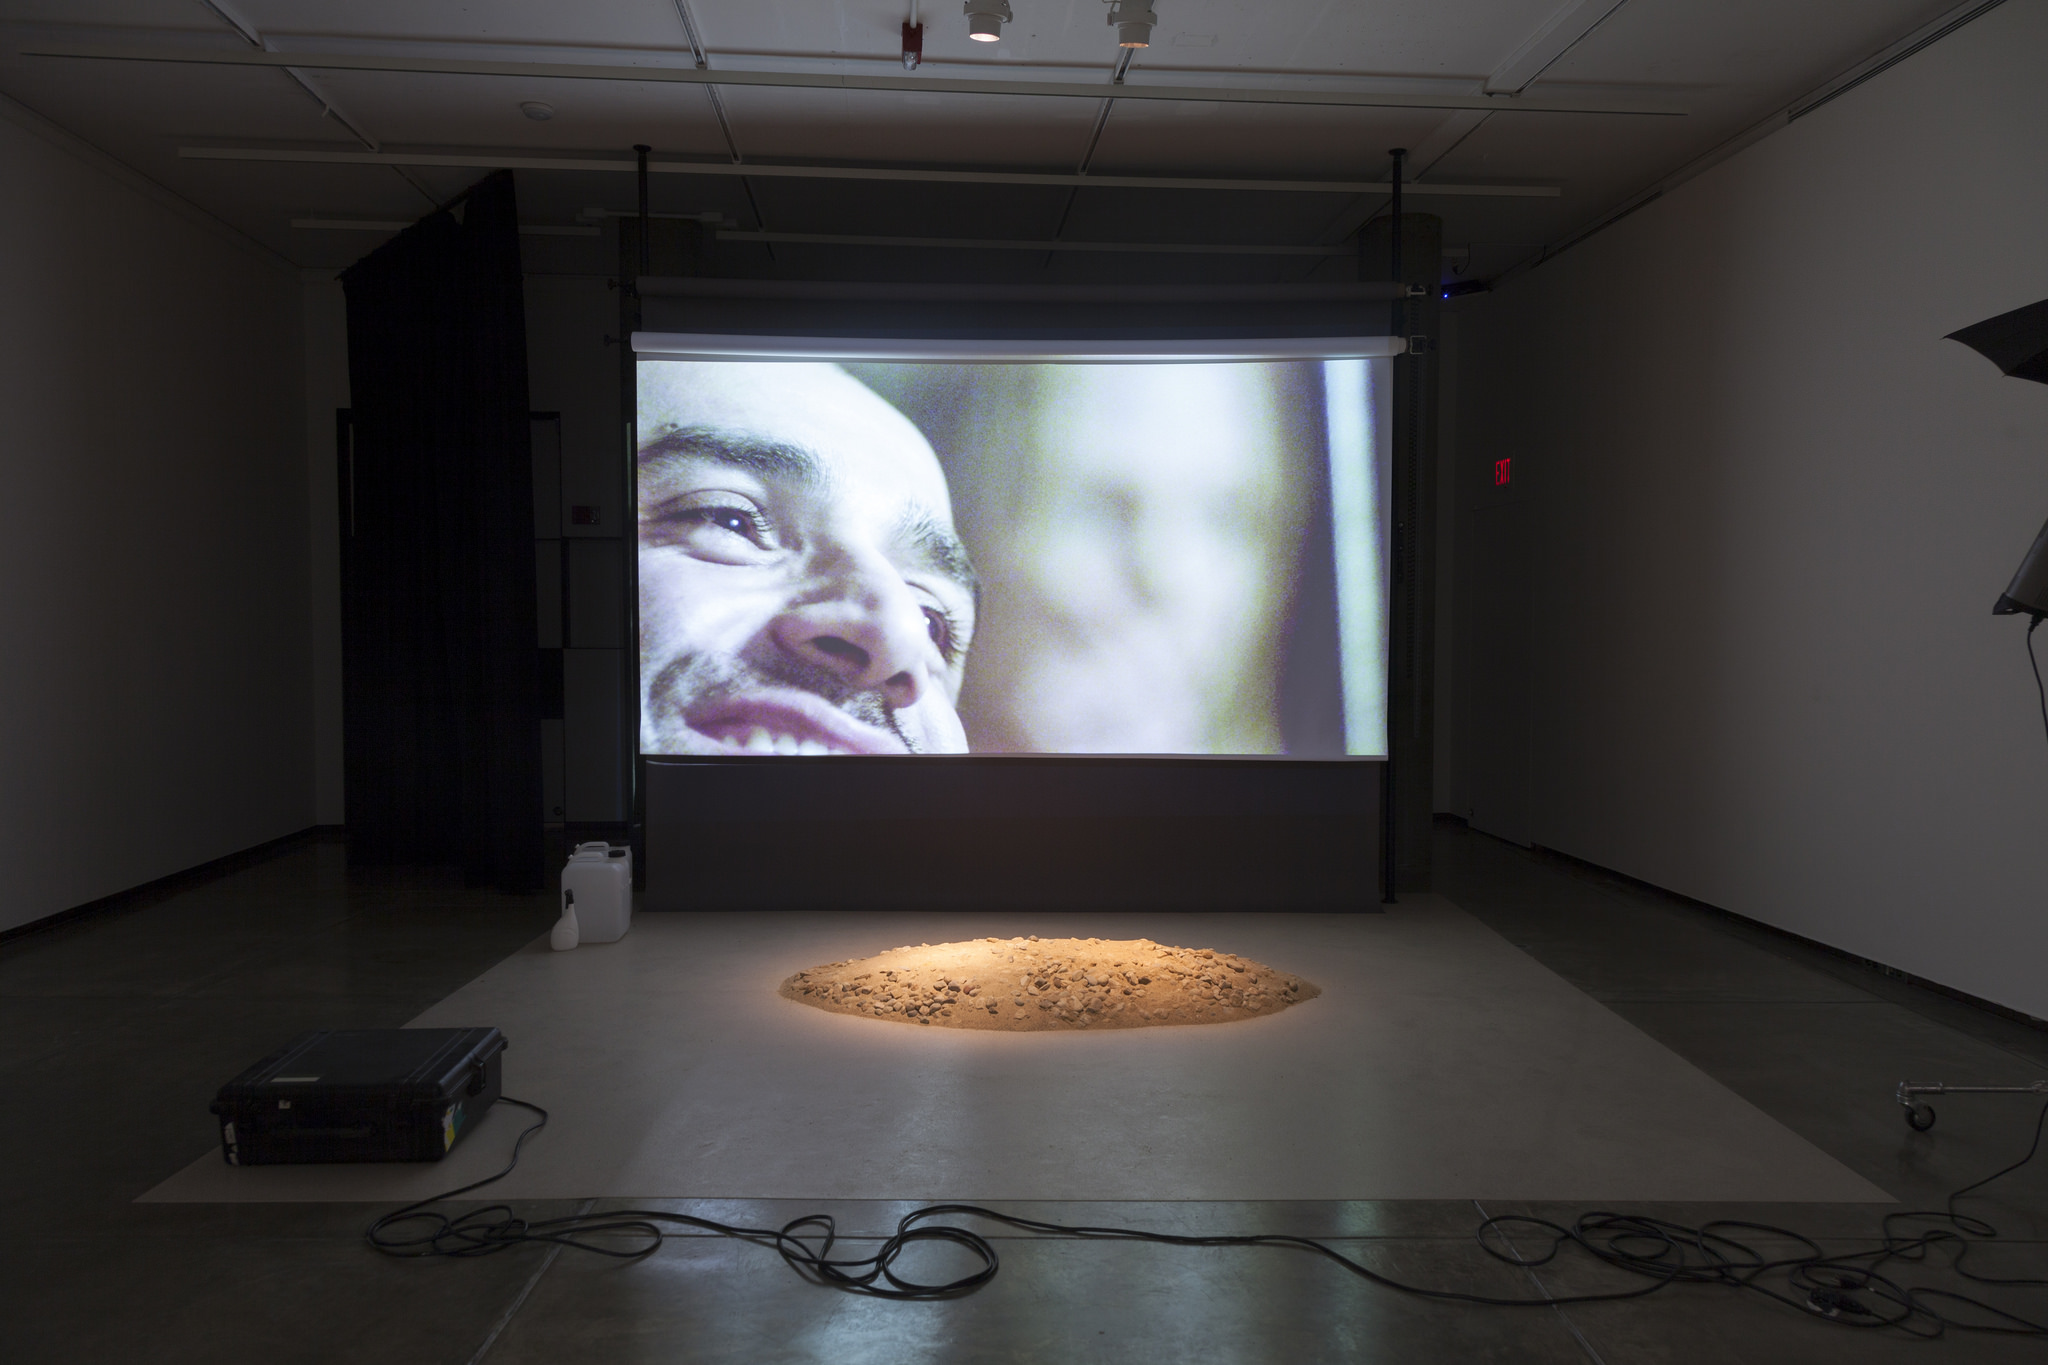  Simon Fujiwara,  Studio Pietà (King Kong Komplex) , 2013, mixed media installation with video projection, duration: 20:30, dimensions variable. Courtesy of the artist. 